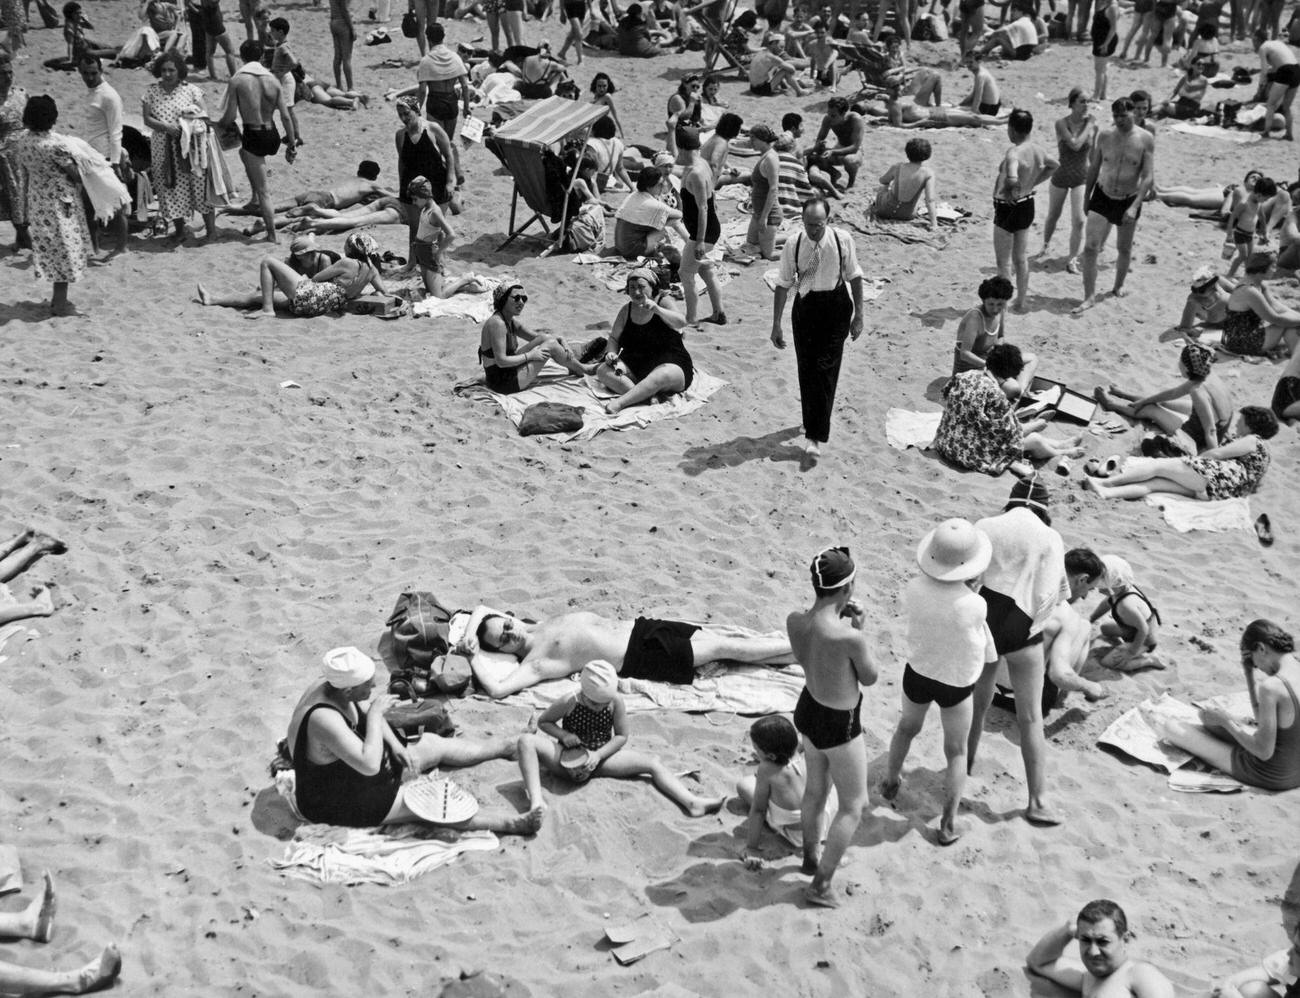 Bathers On Sands At Coney Island, July 1938